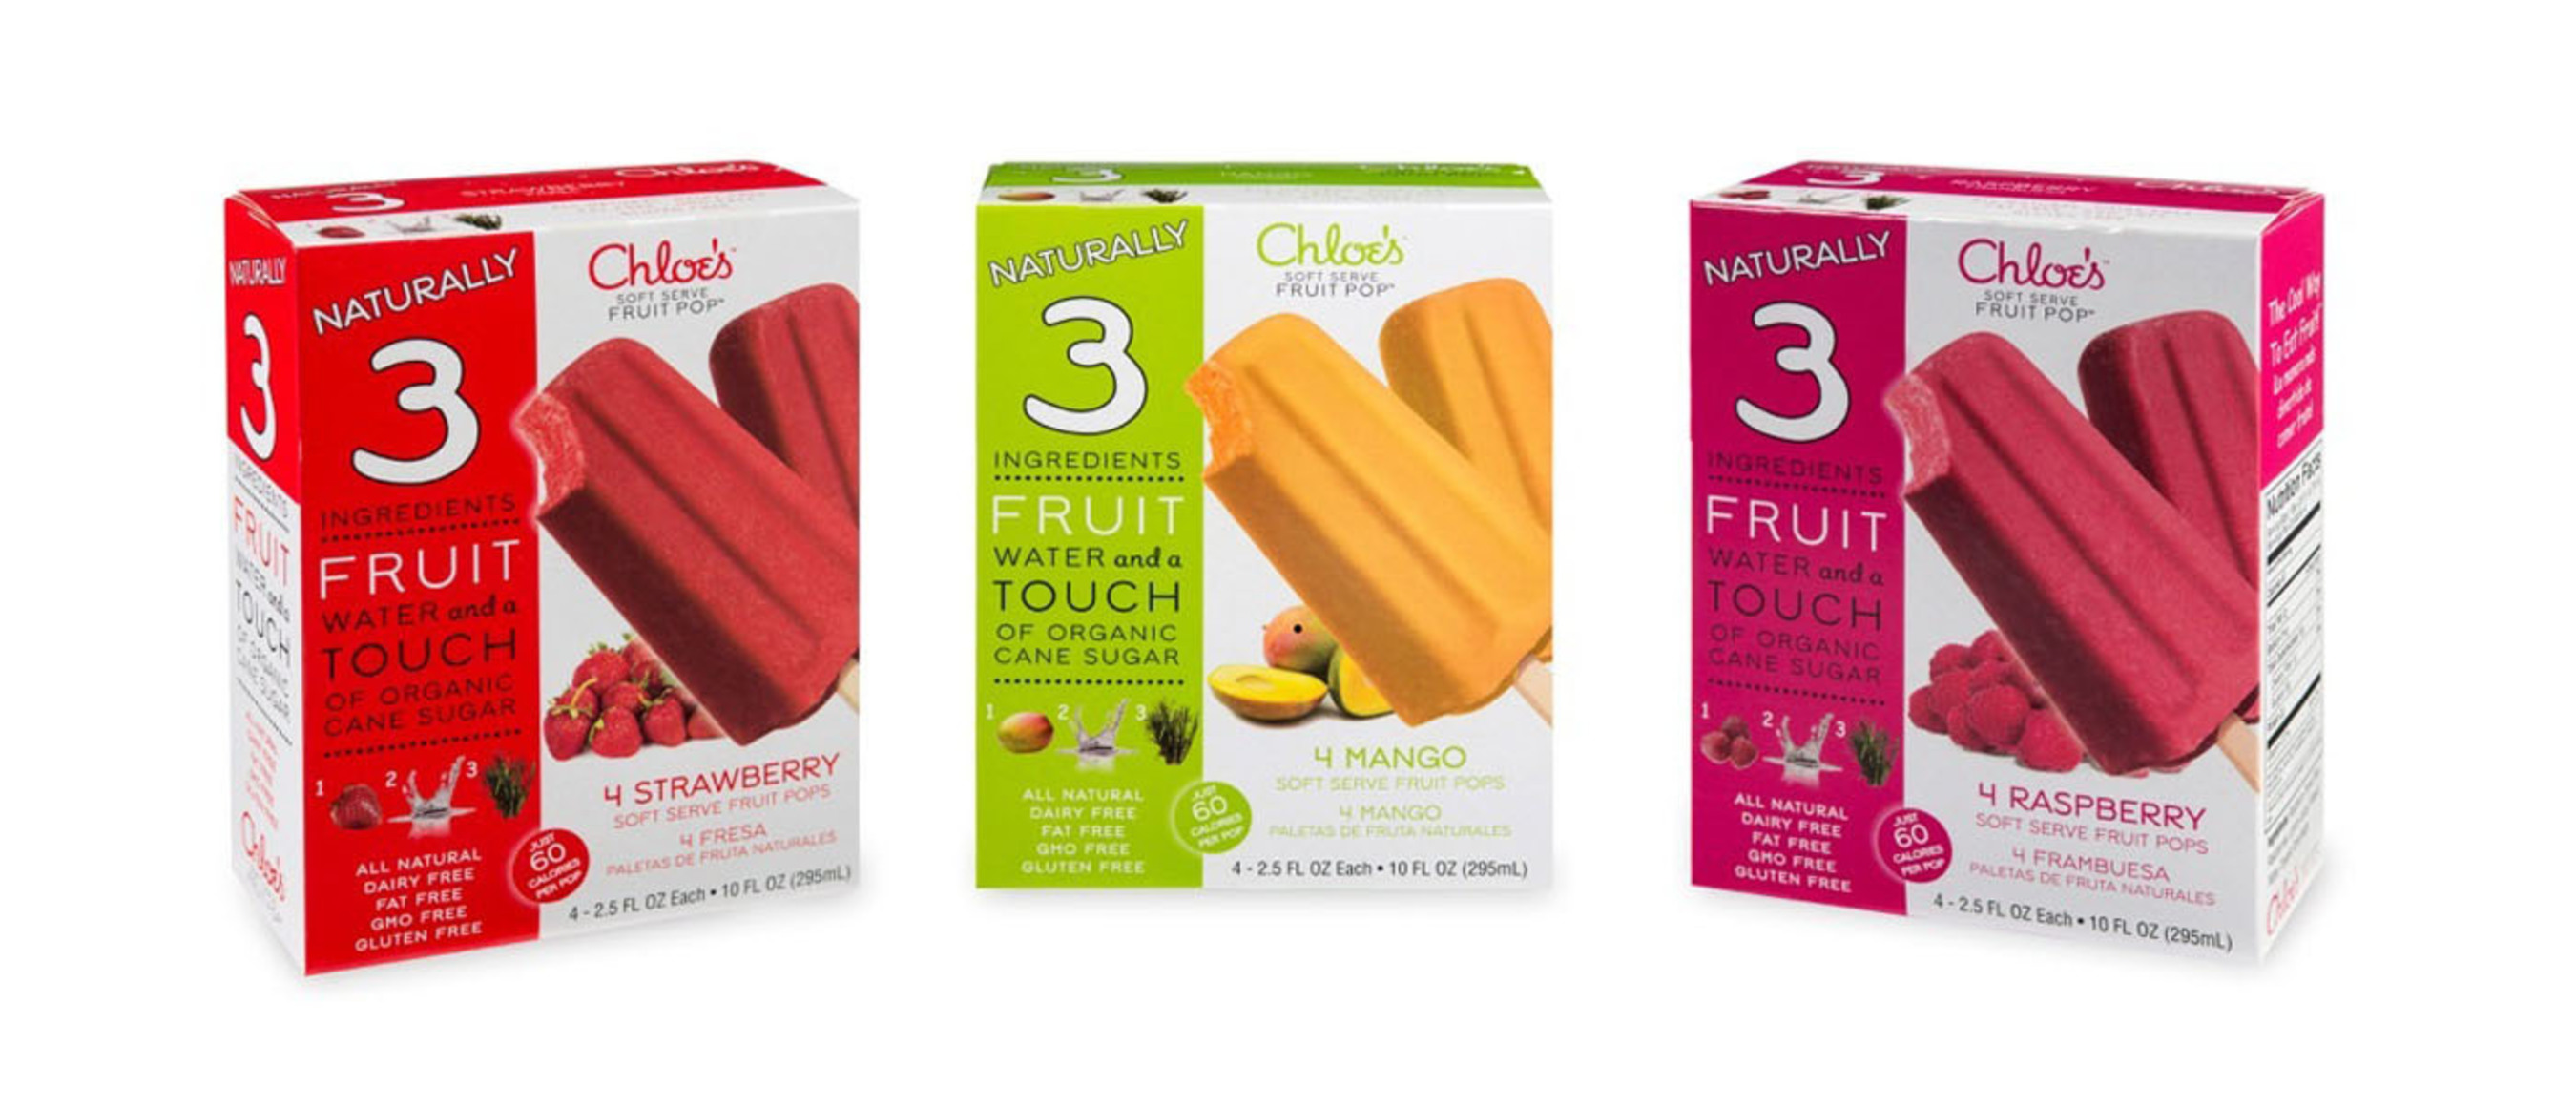 Chloe's Soft Serve Fruit Pops(TM), packaged for retail as 'Chloe's Naturally 3 Pops' come in strawberry, mango and raspberry 4-packs, each pop is 2.5 FL OZ. Made with just three ingredients: real fruit, filtered water and a touch of organic cane sugar, Chloe's Soft Serve Fruit Pops are not your typical frozen fruit bar. (PRNewsFoto/Chloe's Soft Serve Fruit Co) (PRNewsFoto/CHLOE'S SOFT SERVE FRUIT CO)